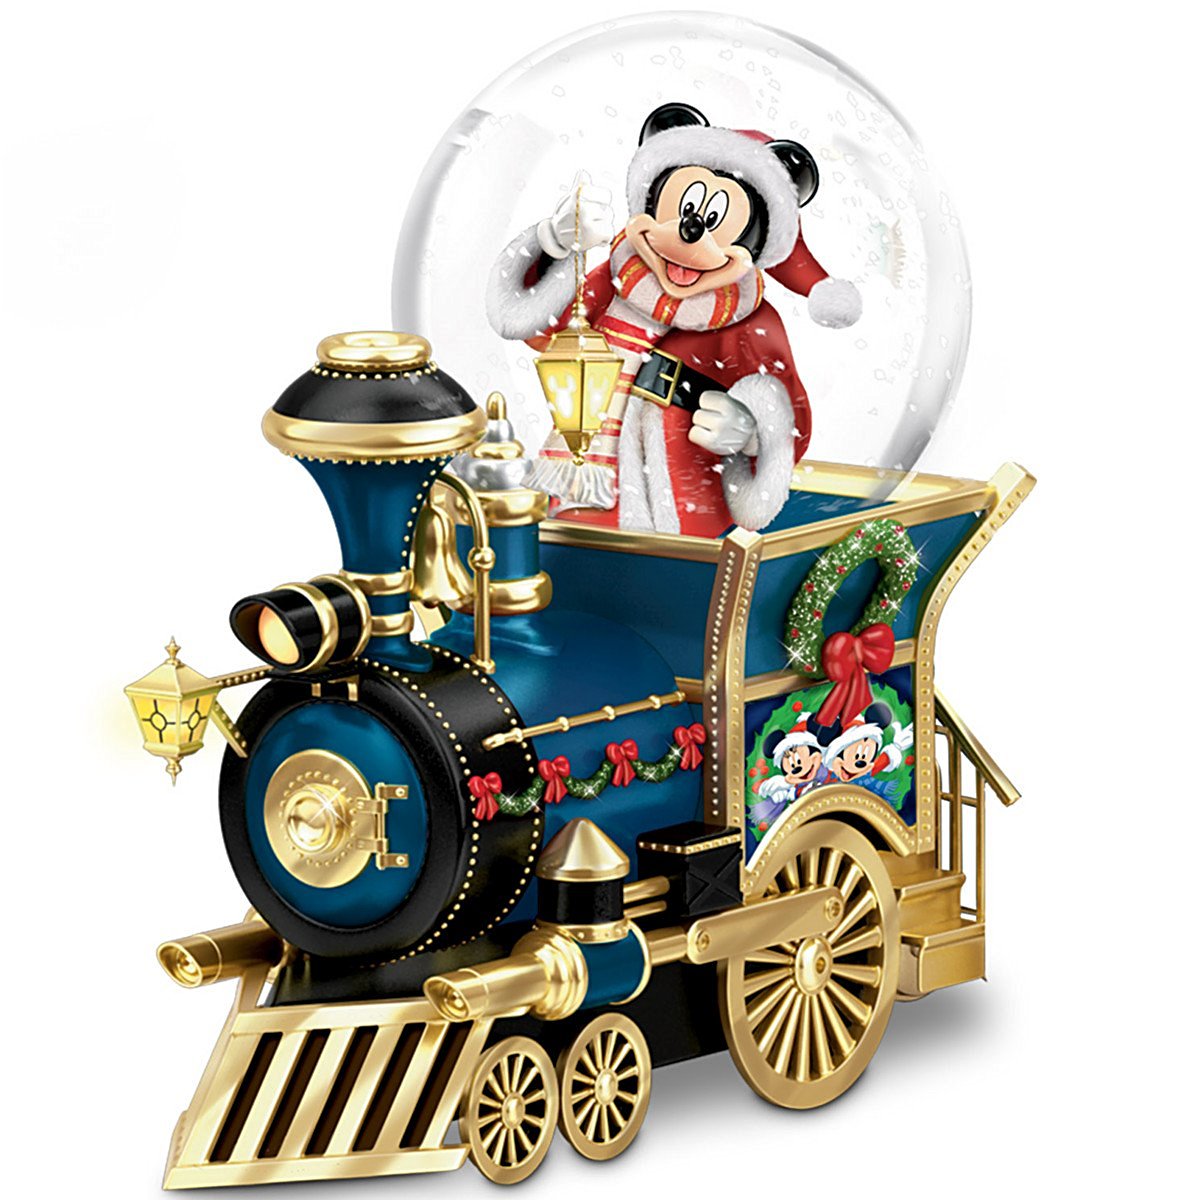 Mickey Mouse Snow Globe Train: Santa Mouse Is Comin’ To Town